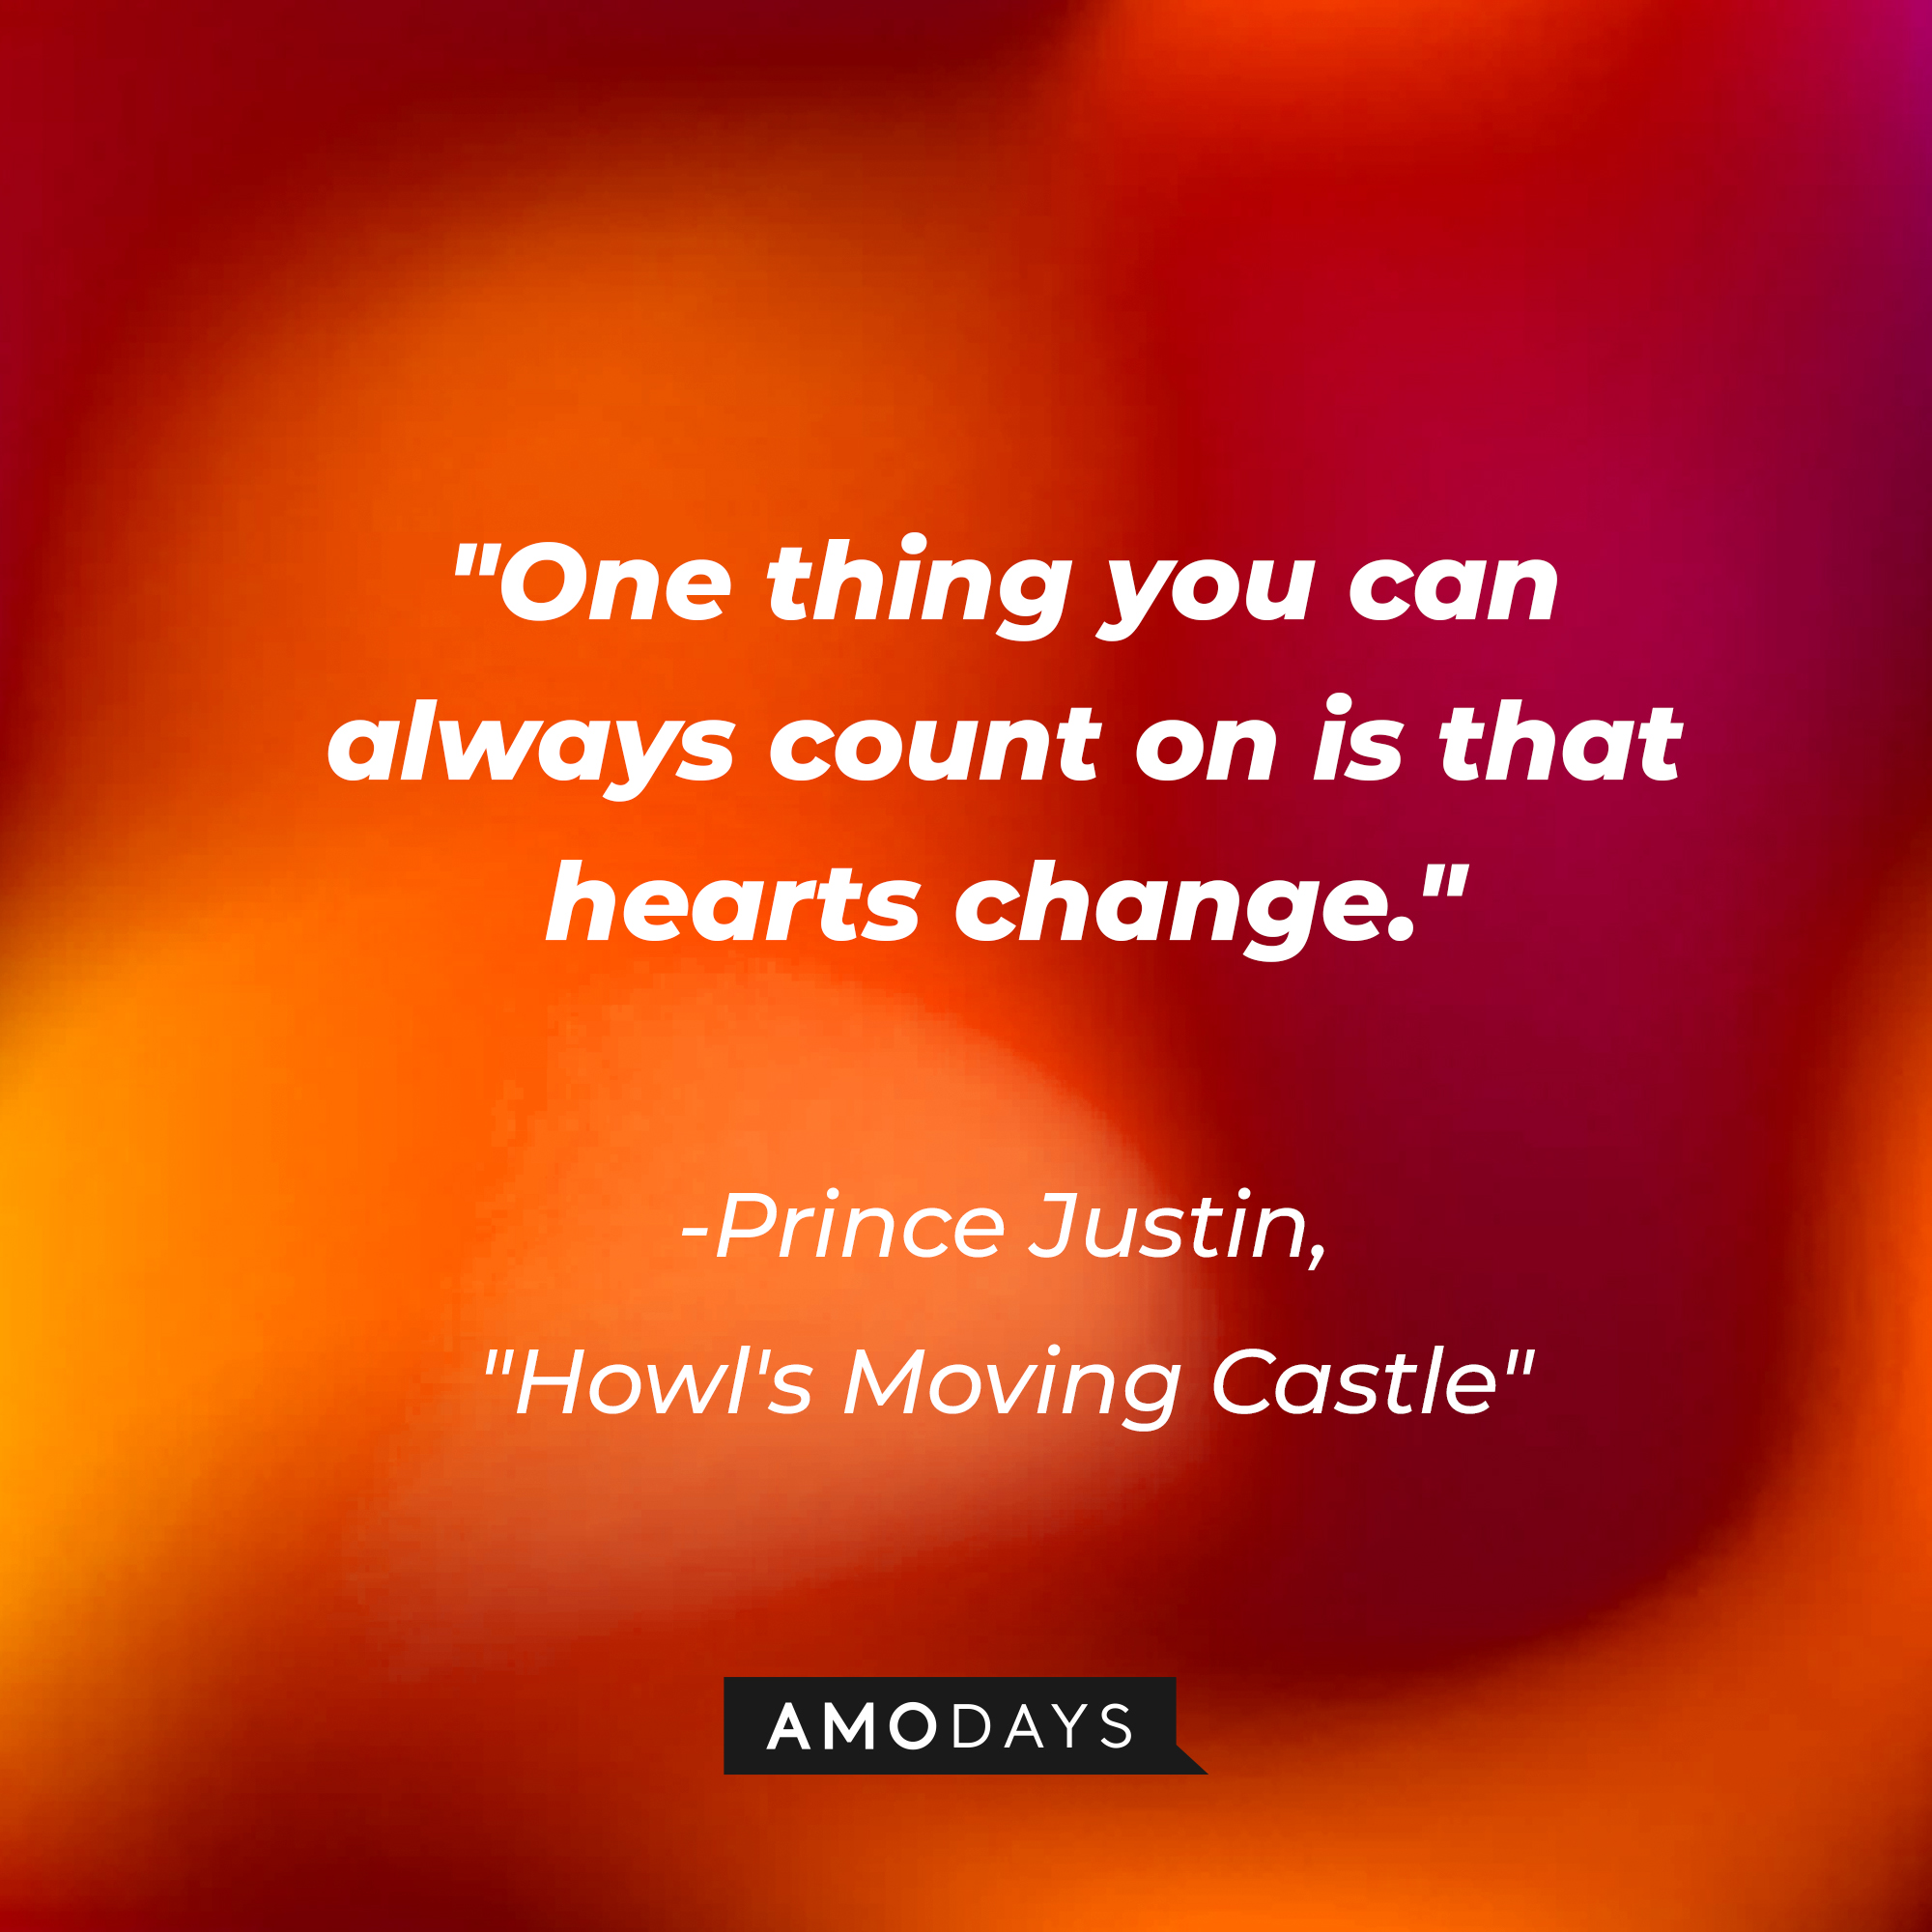 Prince Justin's quote in "Howl's Moving Castle:" "One thing you can always count on is that hearts change." | Source: AmoDays